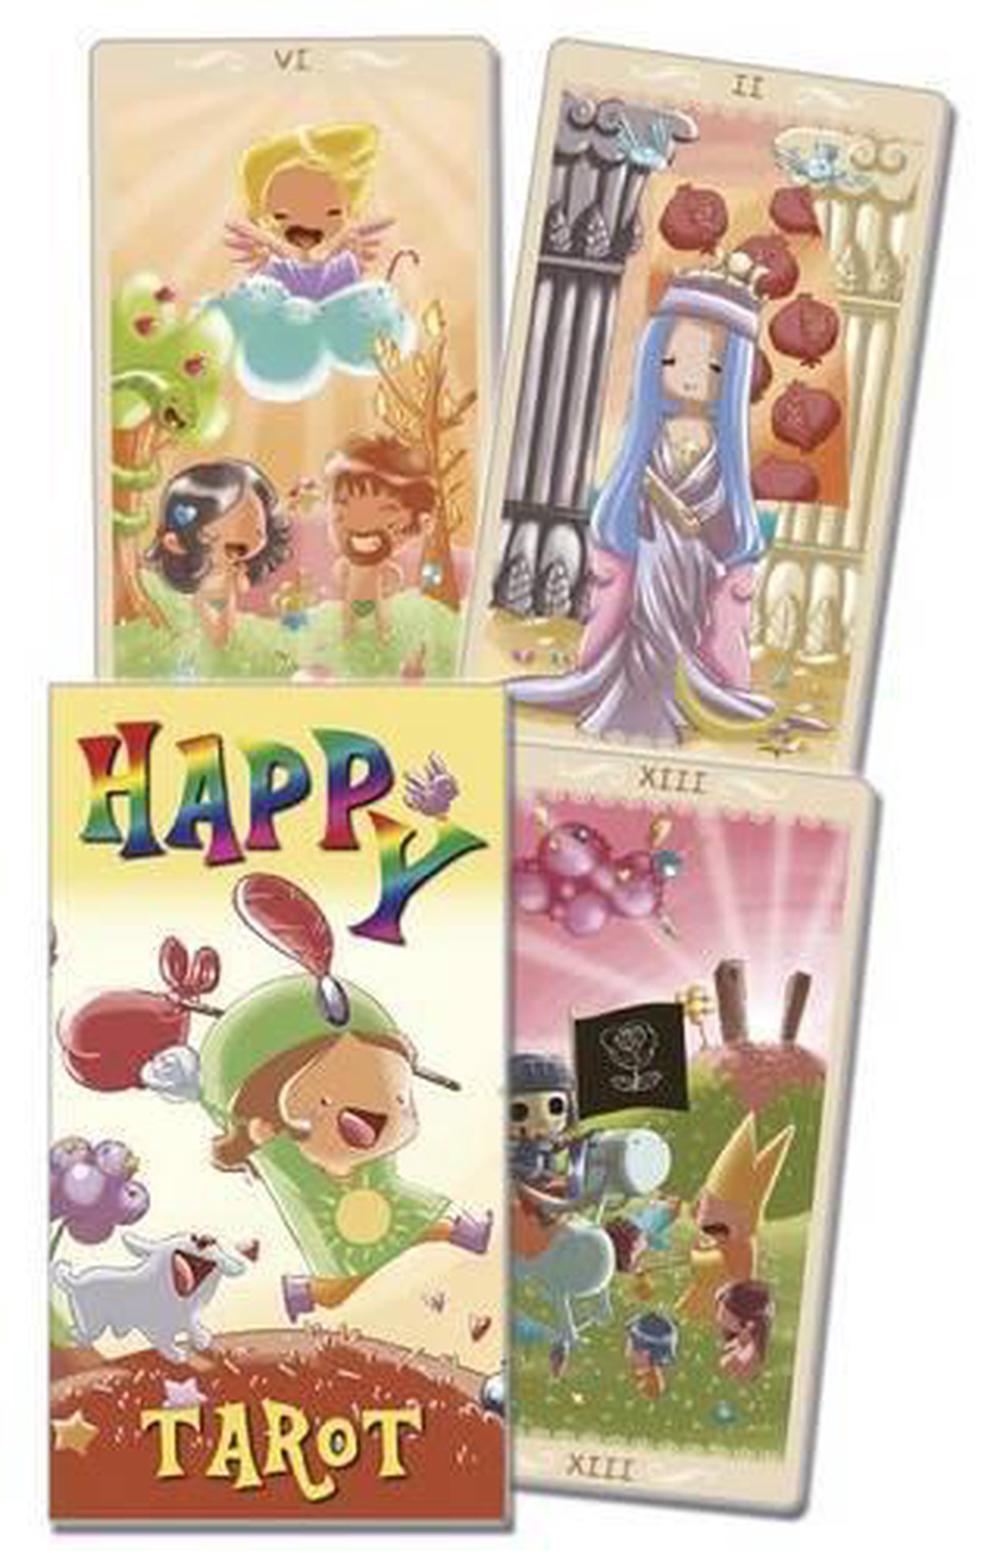 The Happy Tarot by Serena Ficca (English) Free Shipping! 9780738746975